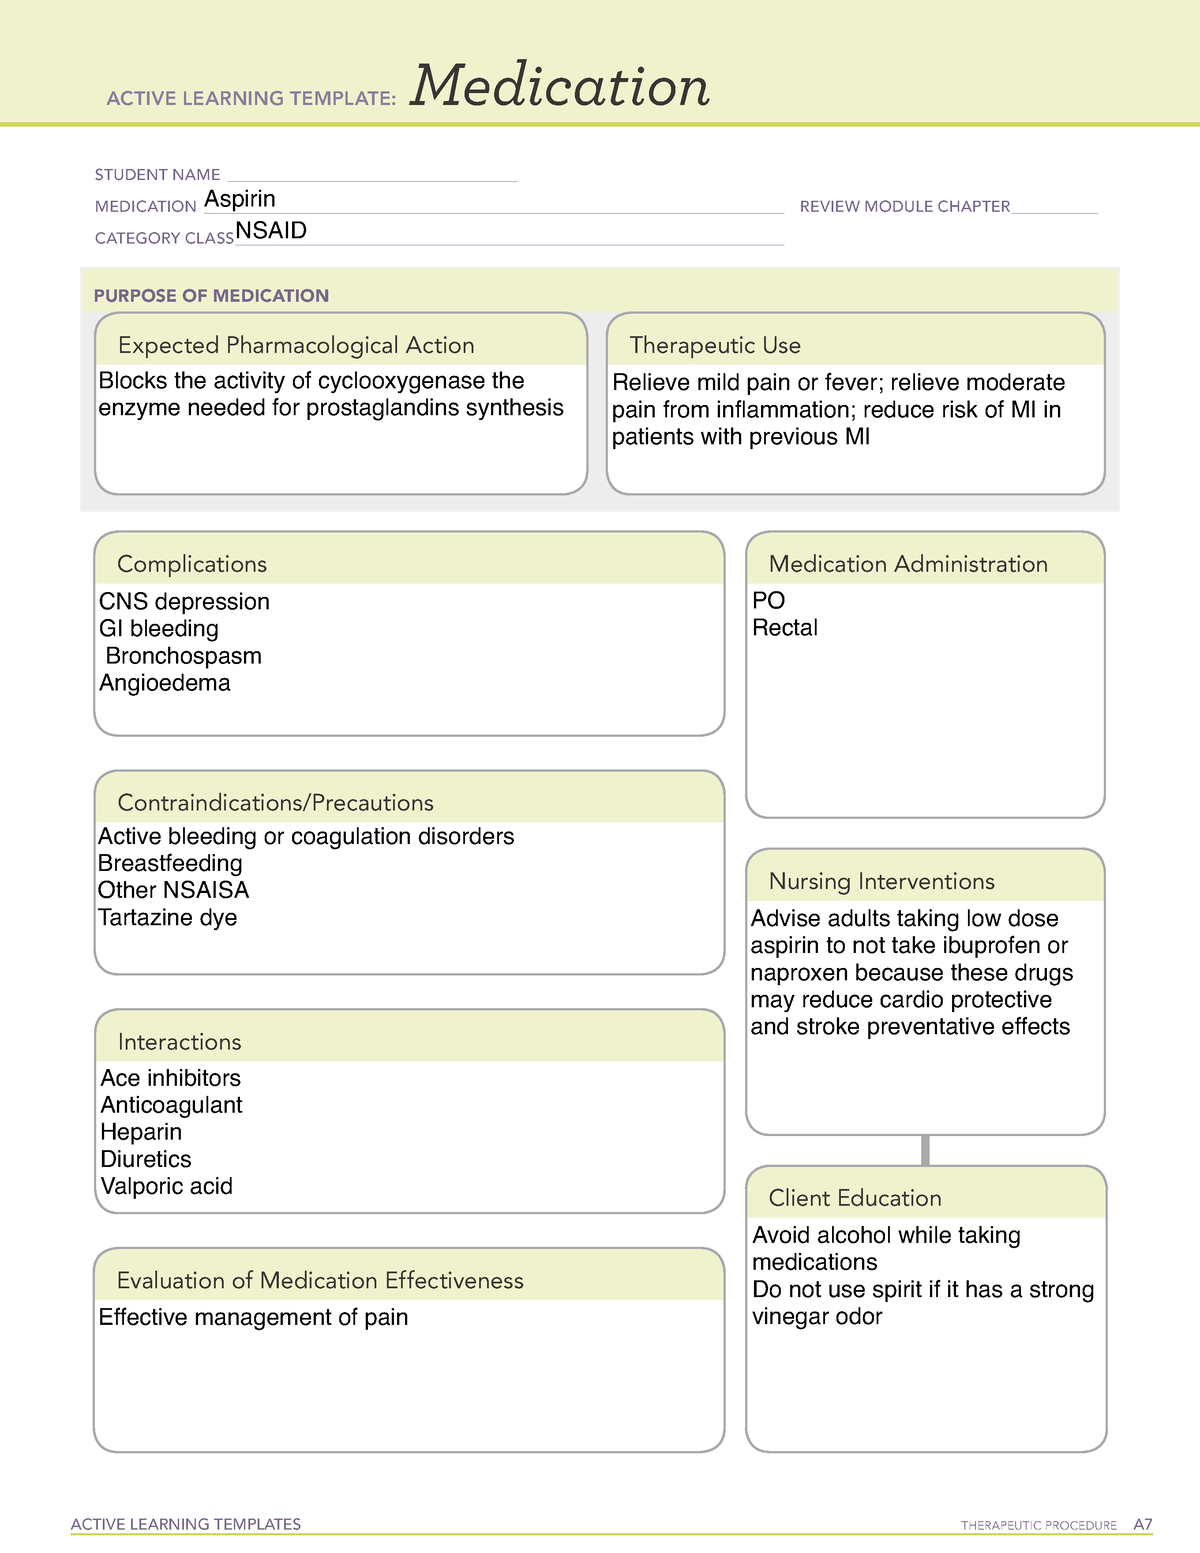 Aspirin Medication template ACTIVE LEARNING TEMPLATES THERAPEUTIC